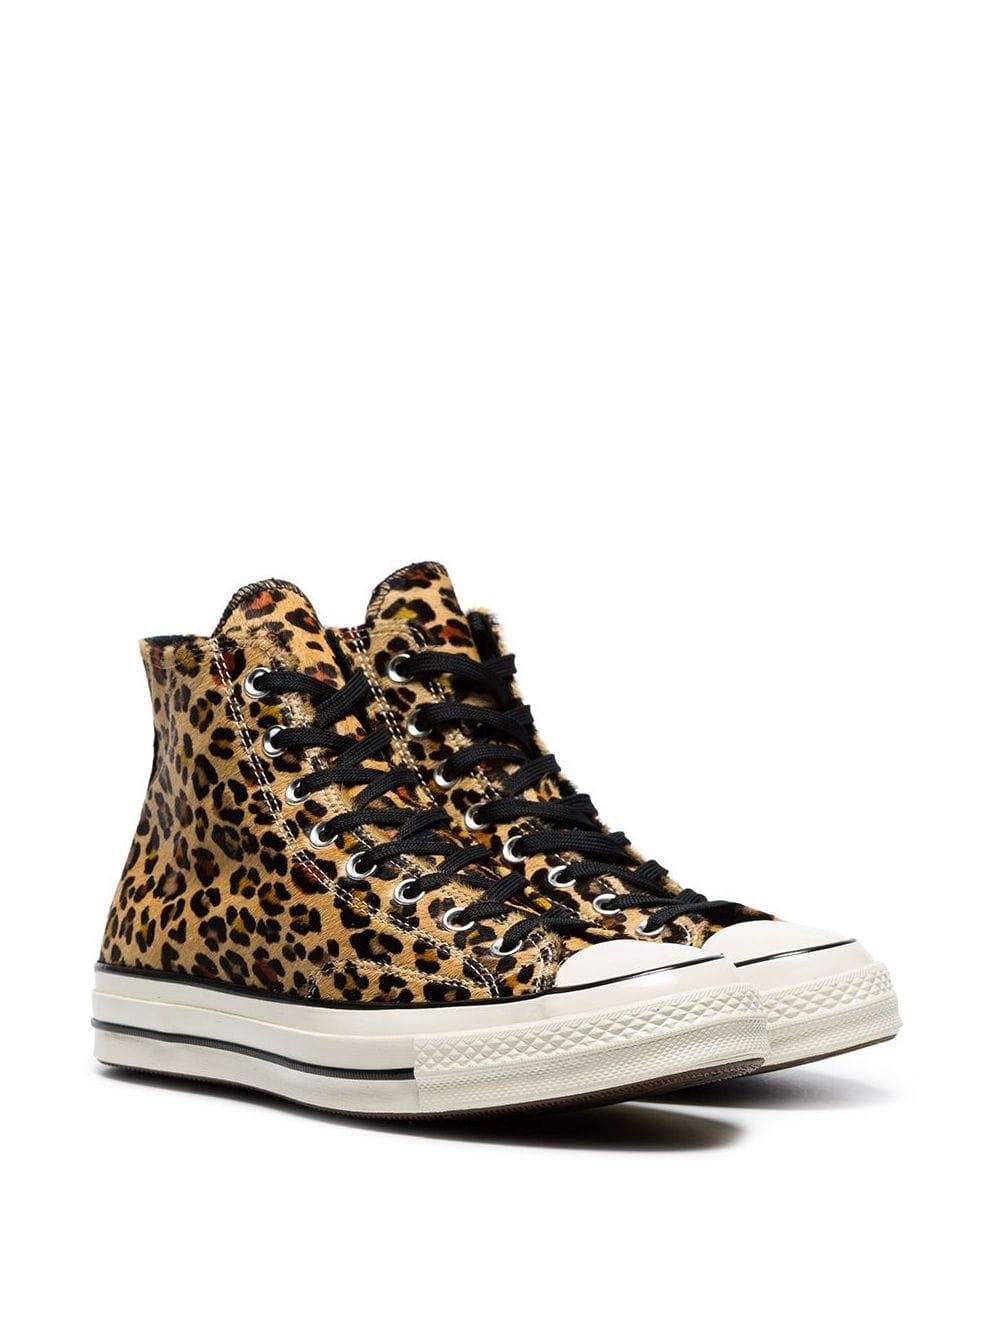 Converse Rubber Leopard Print Chuck Taylor 70's High-top Sneakers for ...